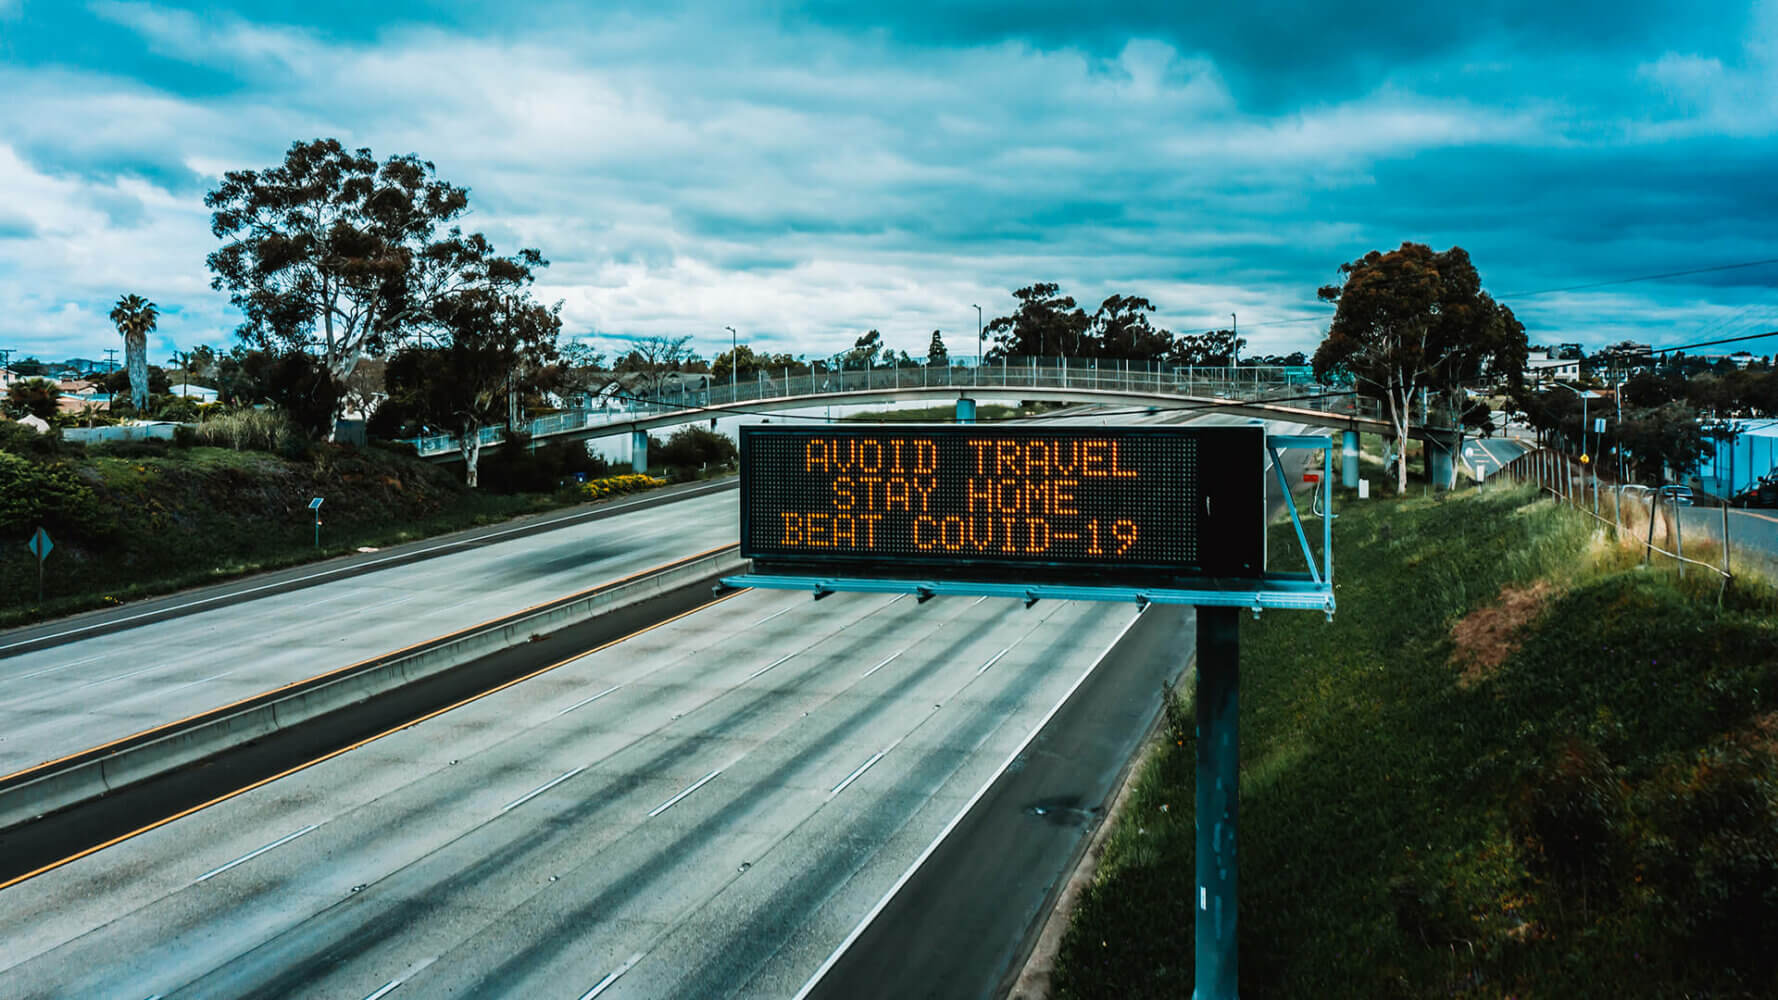 A sign above the freeway states the ominous words "AVOID TRAVEL STAY HOME BEAT COVID-19"